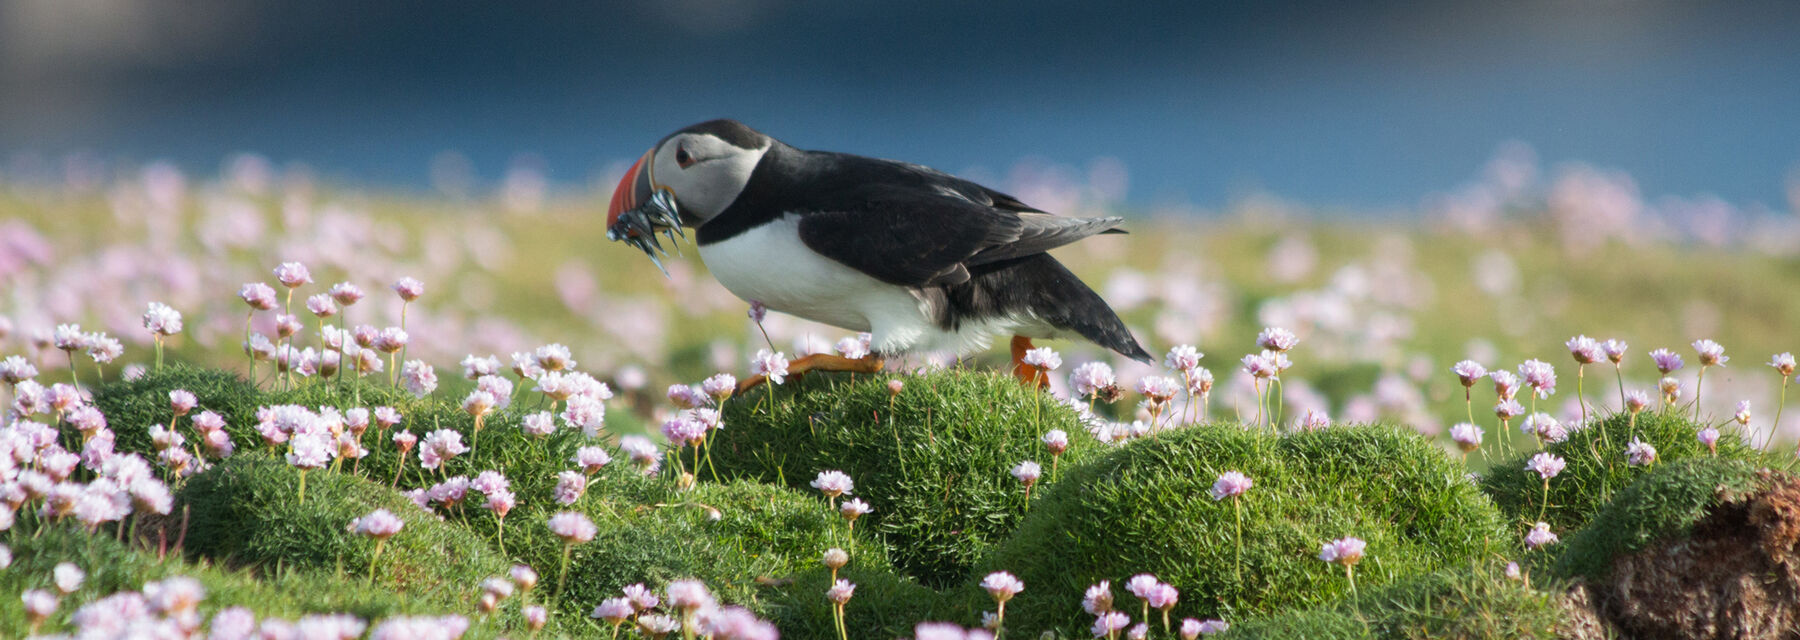 A puffin walks across a flower-covered cliff top. It has some food in its beak.